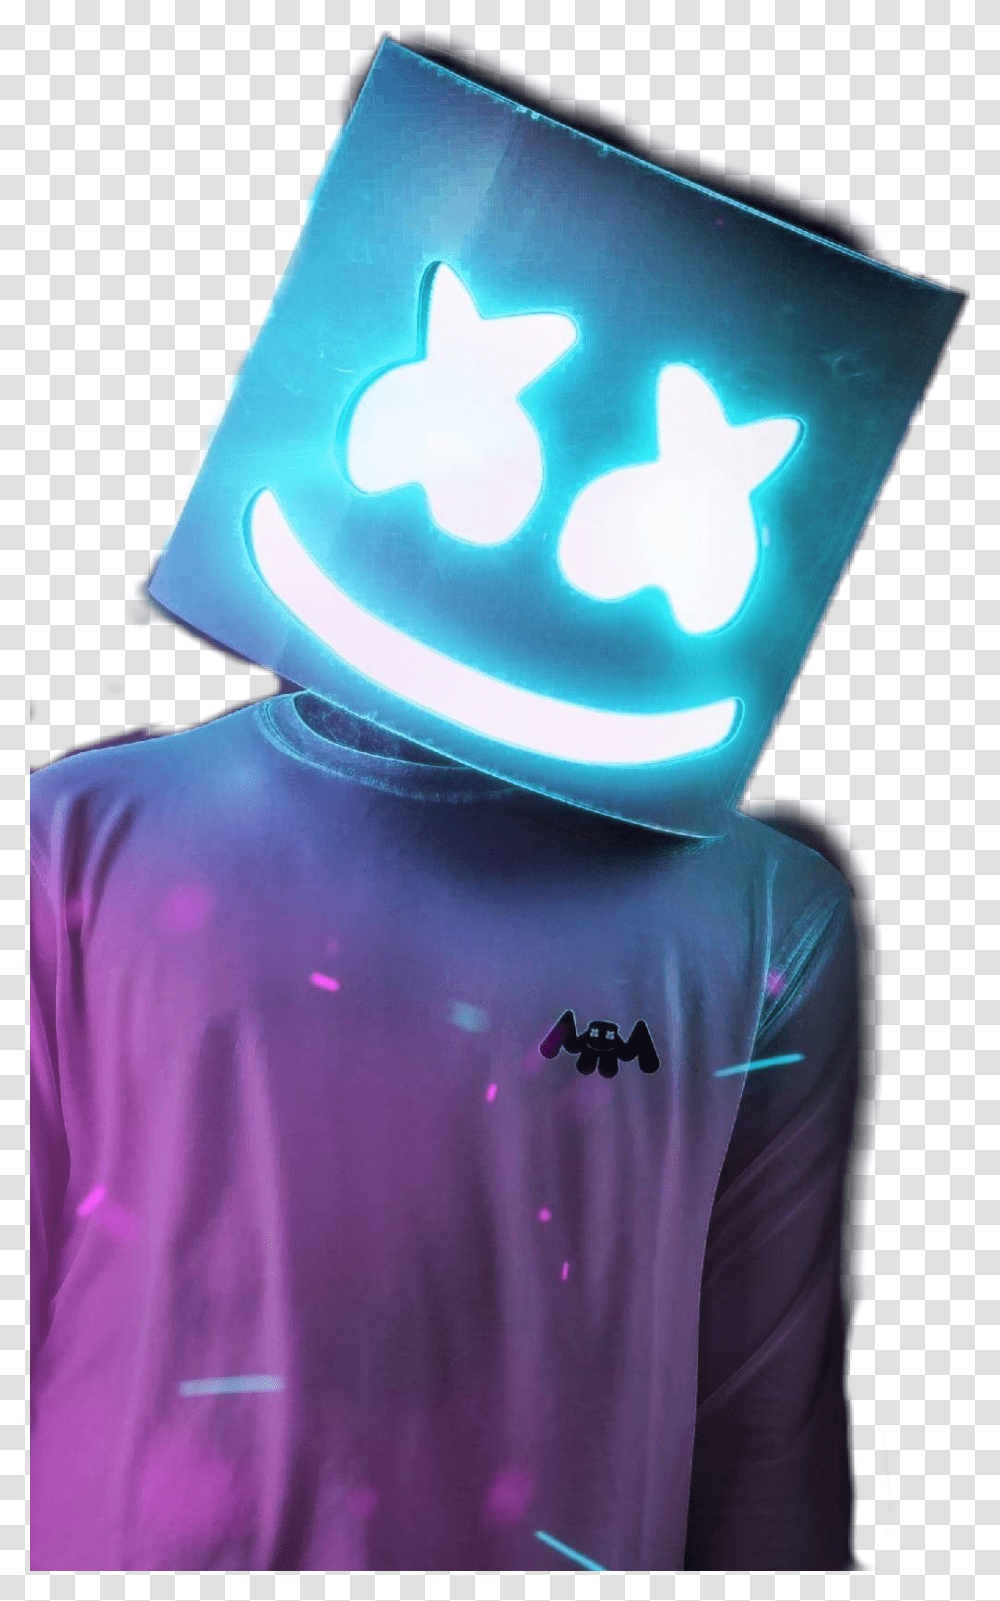 Marshmello Happy Man Masklight Sad Blue Triste Marshmello Hd Wallpapers For Iphone, Apparel, Sleeve, Person Transparent Png